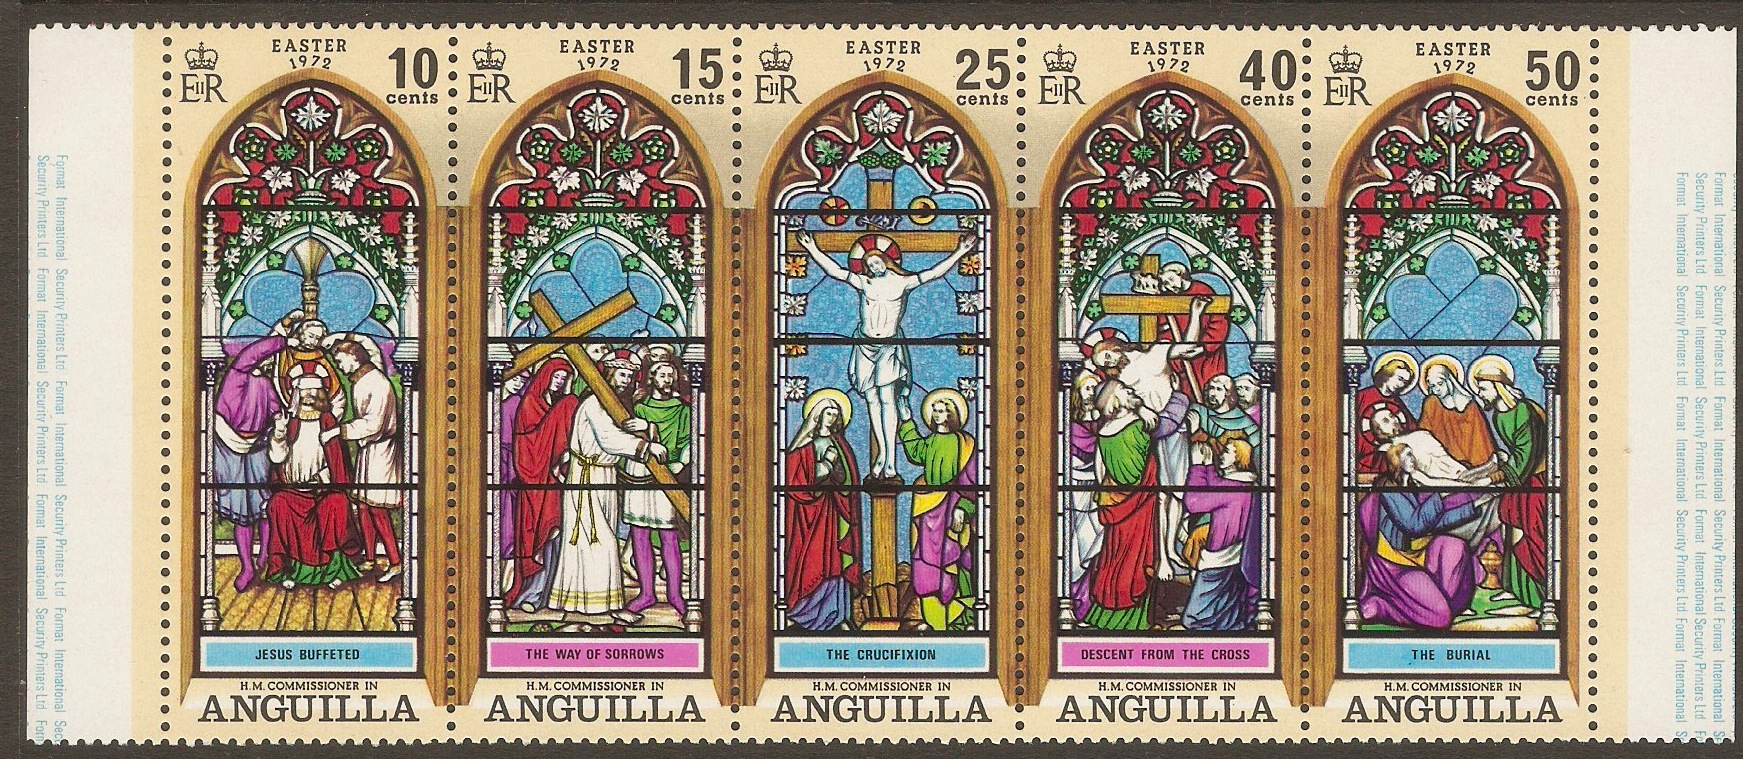 Anguilla 1972 Easter Paintings set. SG125-SG129.